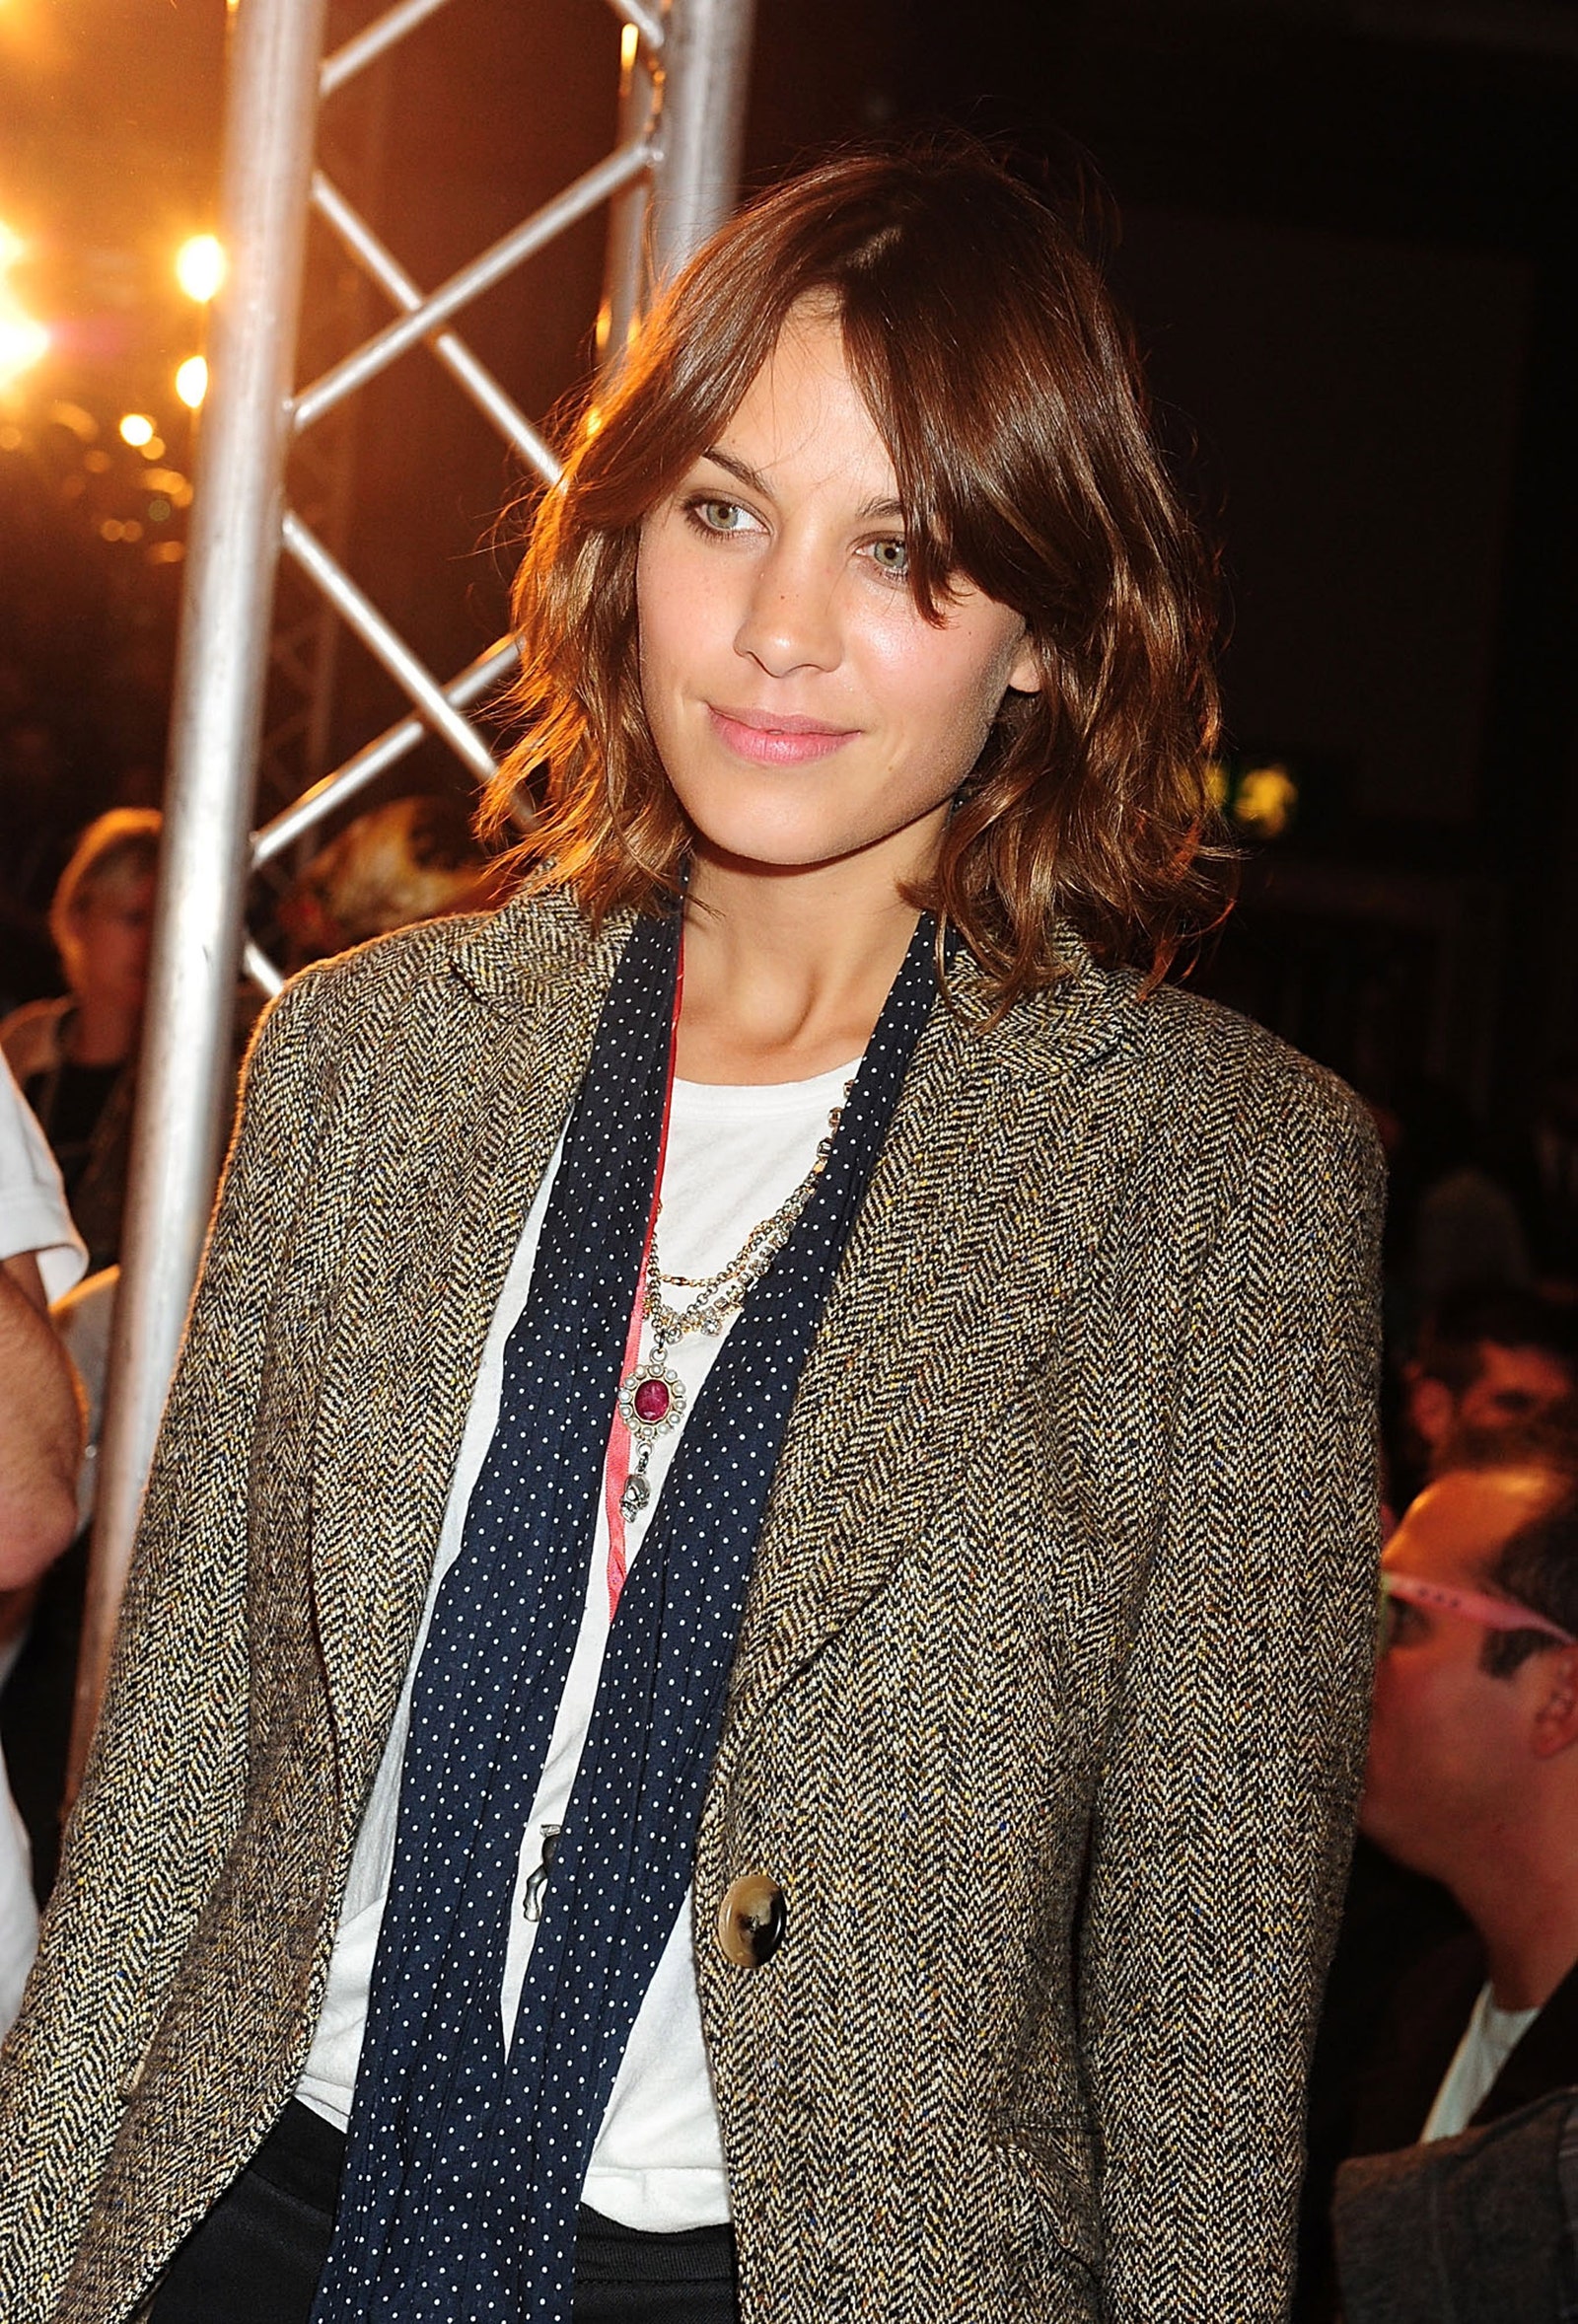 Image may contain Alexa Chung Blazer Clothing Coat Jacket Accessories Formal Wear Tie Adult Person Face and Head